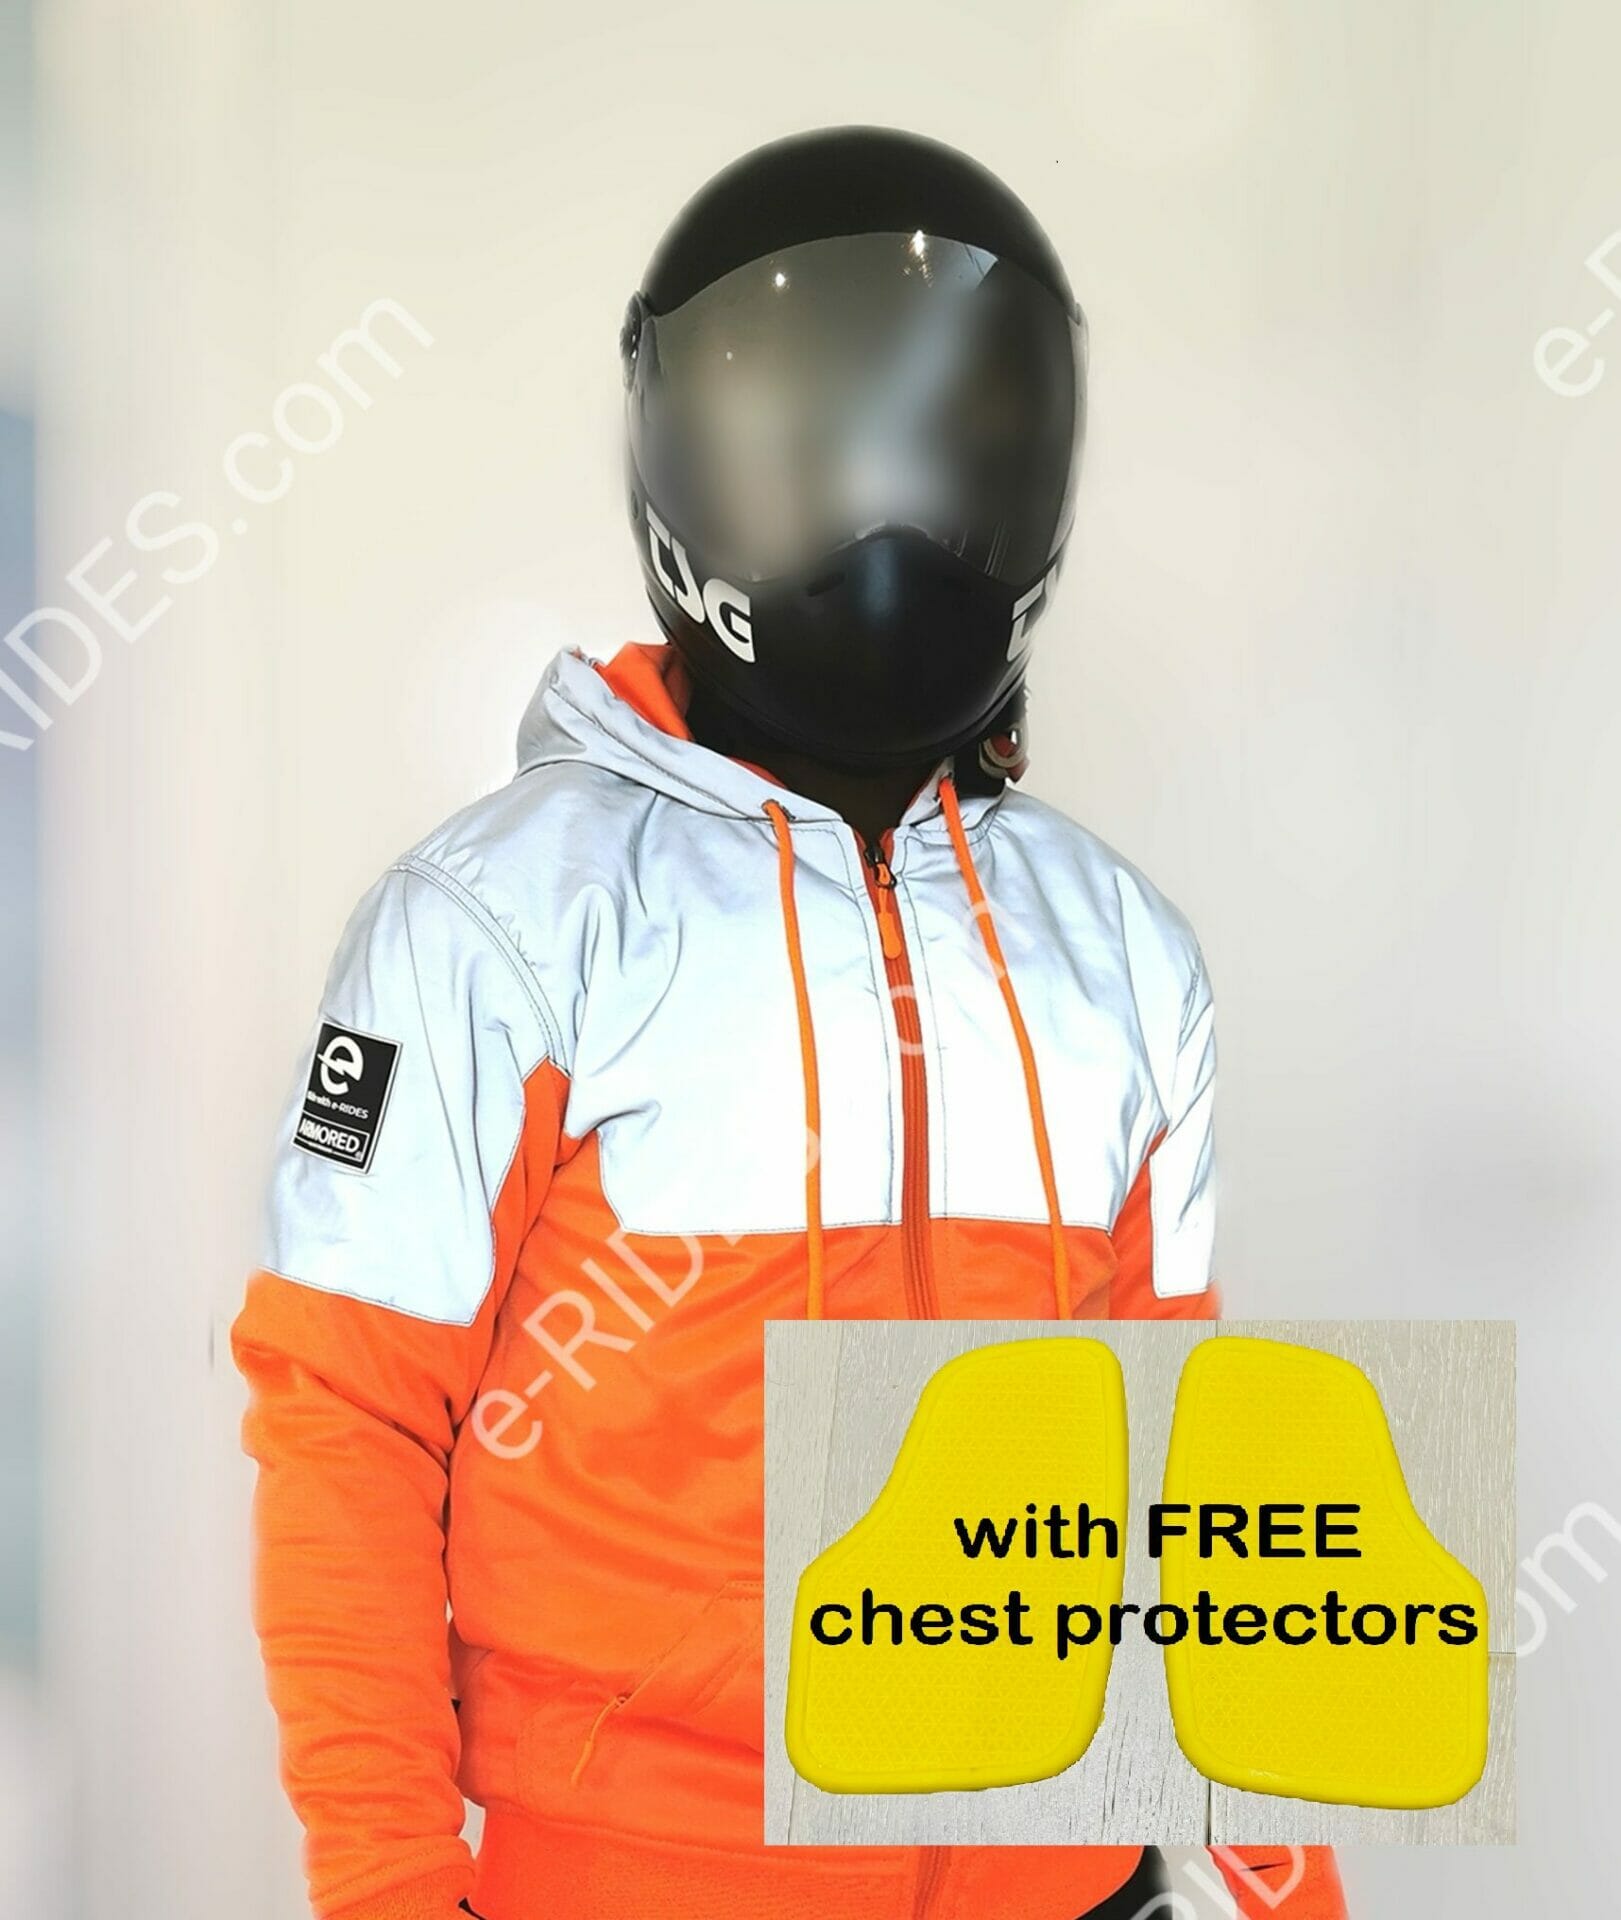 e-RIDES Edition Lazyrolling performance jacket with chest protectors in orange